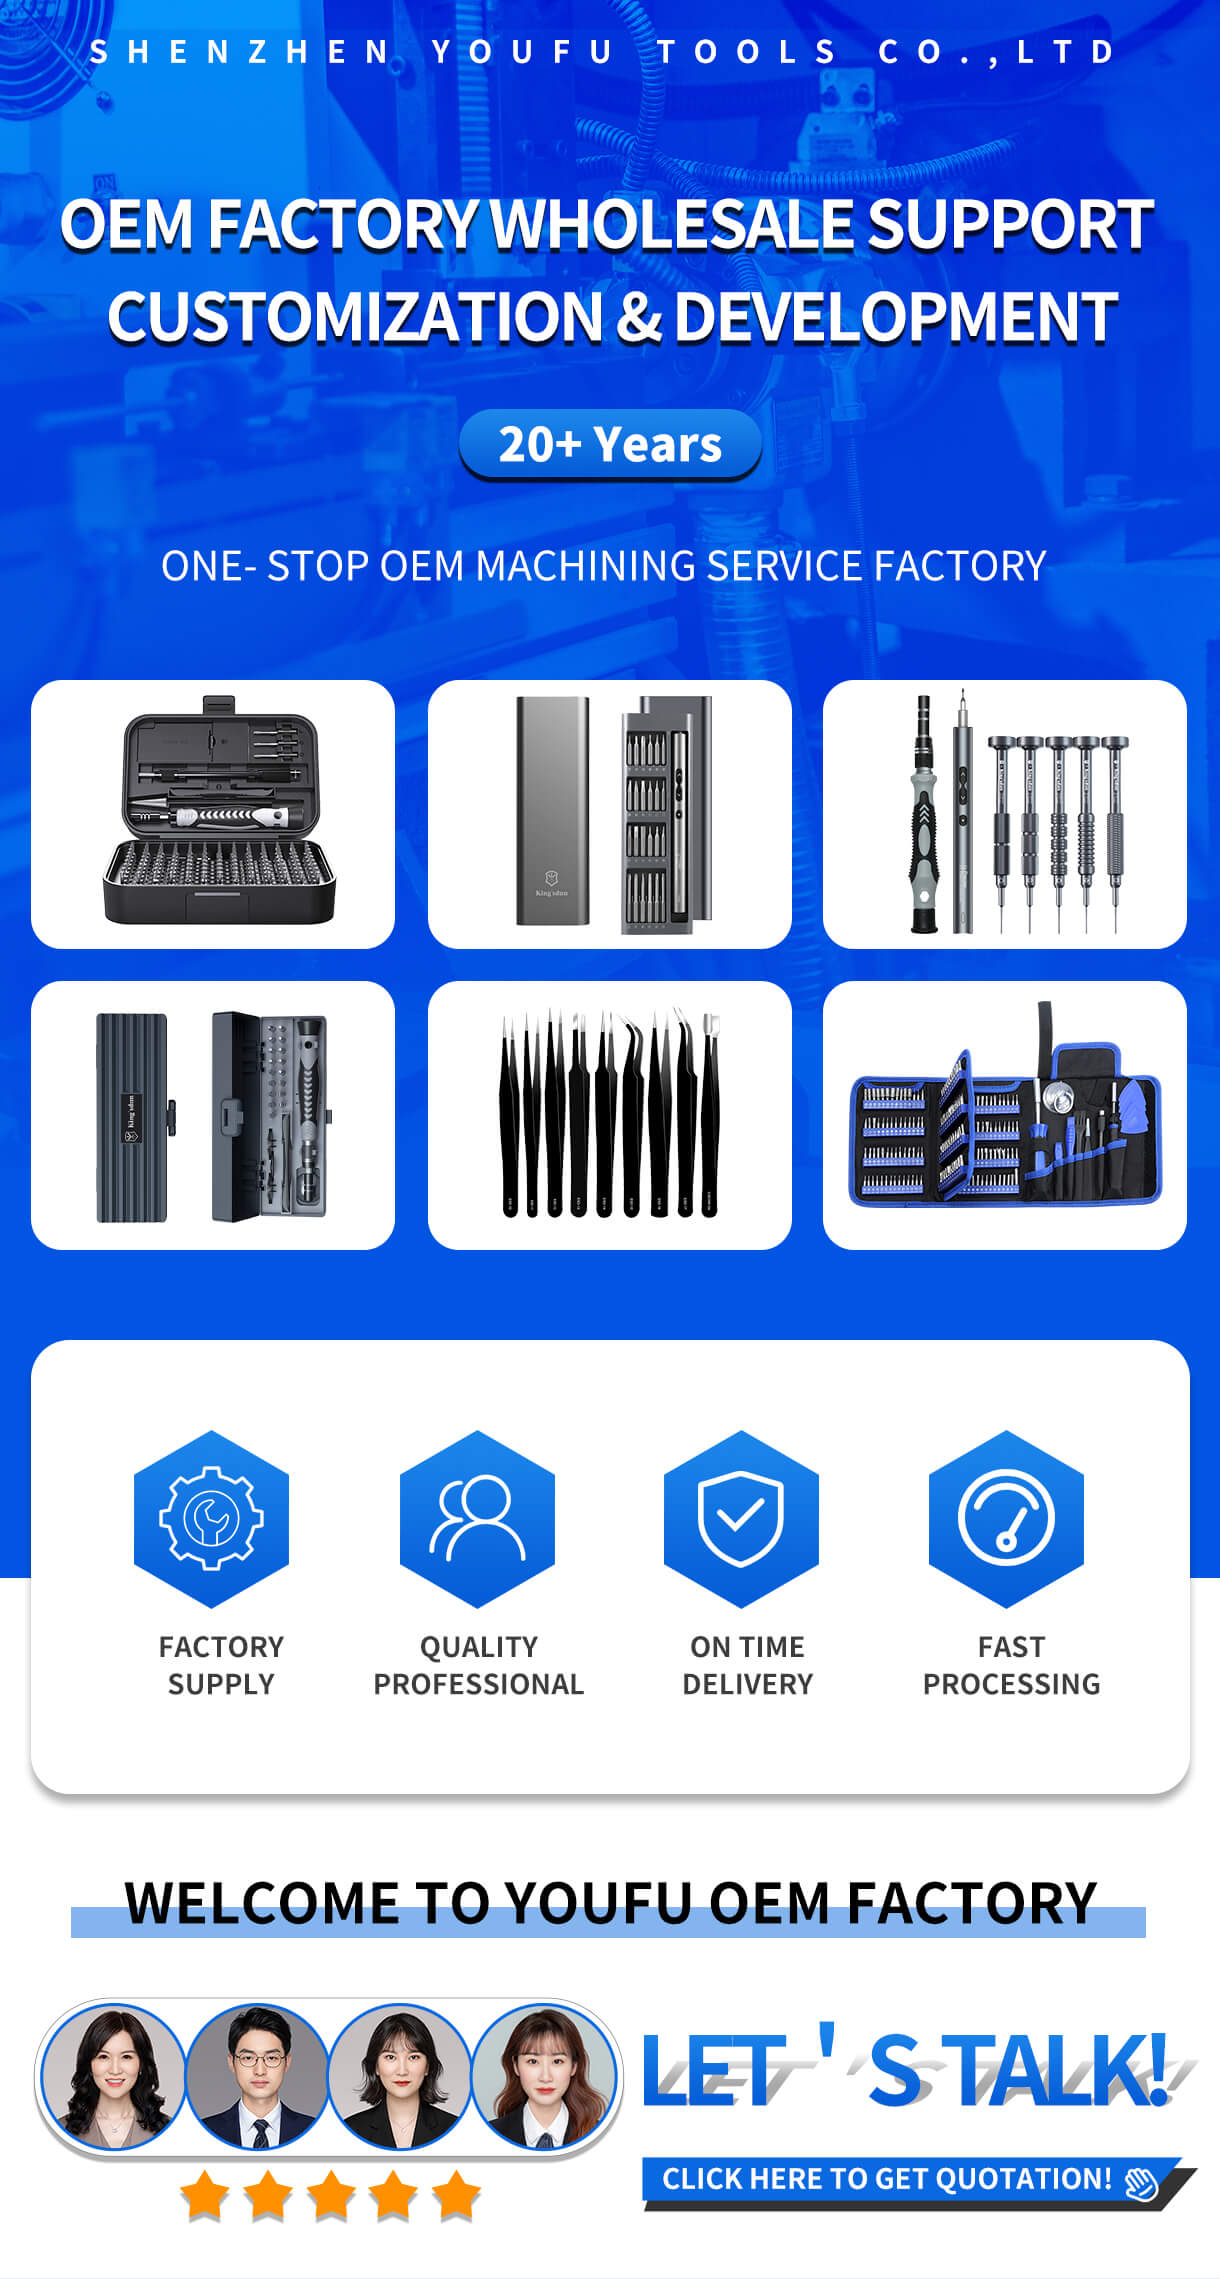 1. Precision electric repair screwdriver set2. 15 bits S2 steel, soft rubber base for storage3. Strong magnetic adsorption, wear-resistant and durable, anti-rust4. Suitable for the maintenance of high-precision mechanical products such as mobile phones, computers, glasses, watches, cameras, etc.5. T